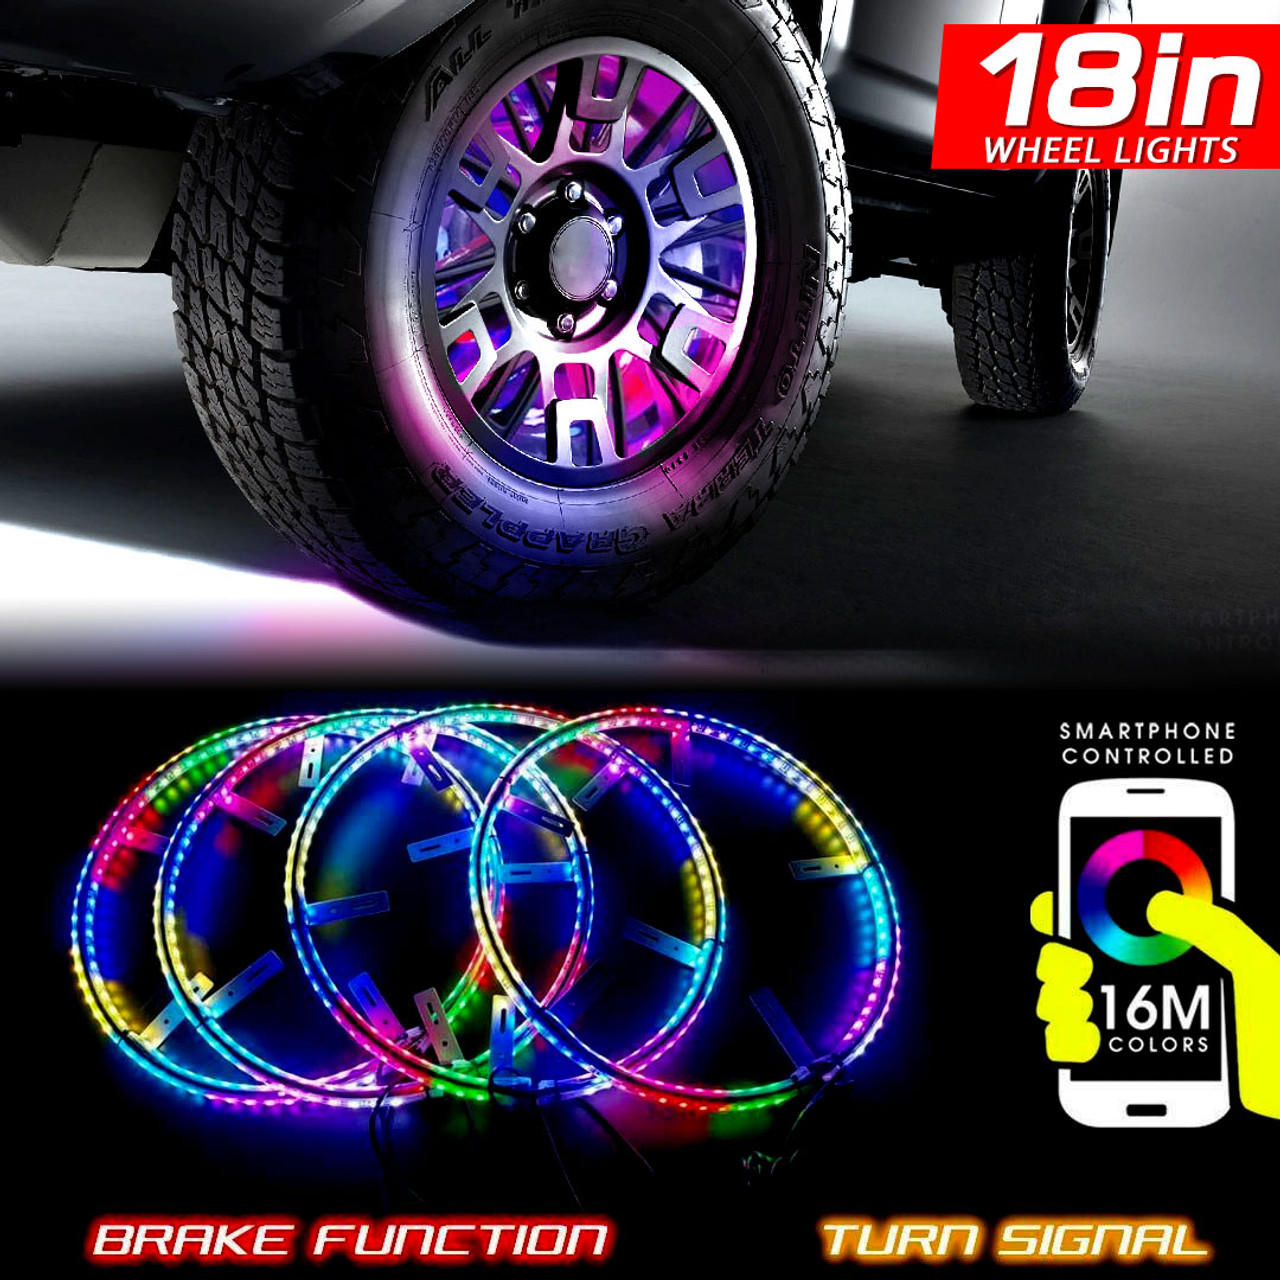 LED WHEEL RING LIGHTS | XKCHROME SMARTPHONE APP CONTROLLED - Mr. Kustom  Auto Accessories and Customizing